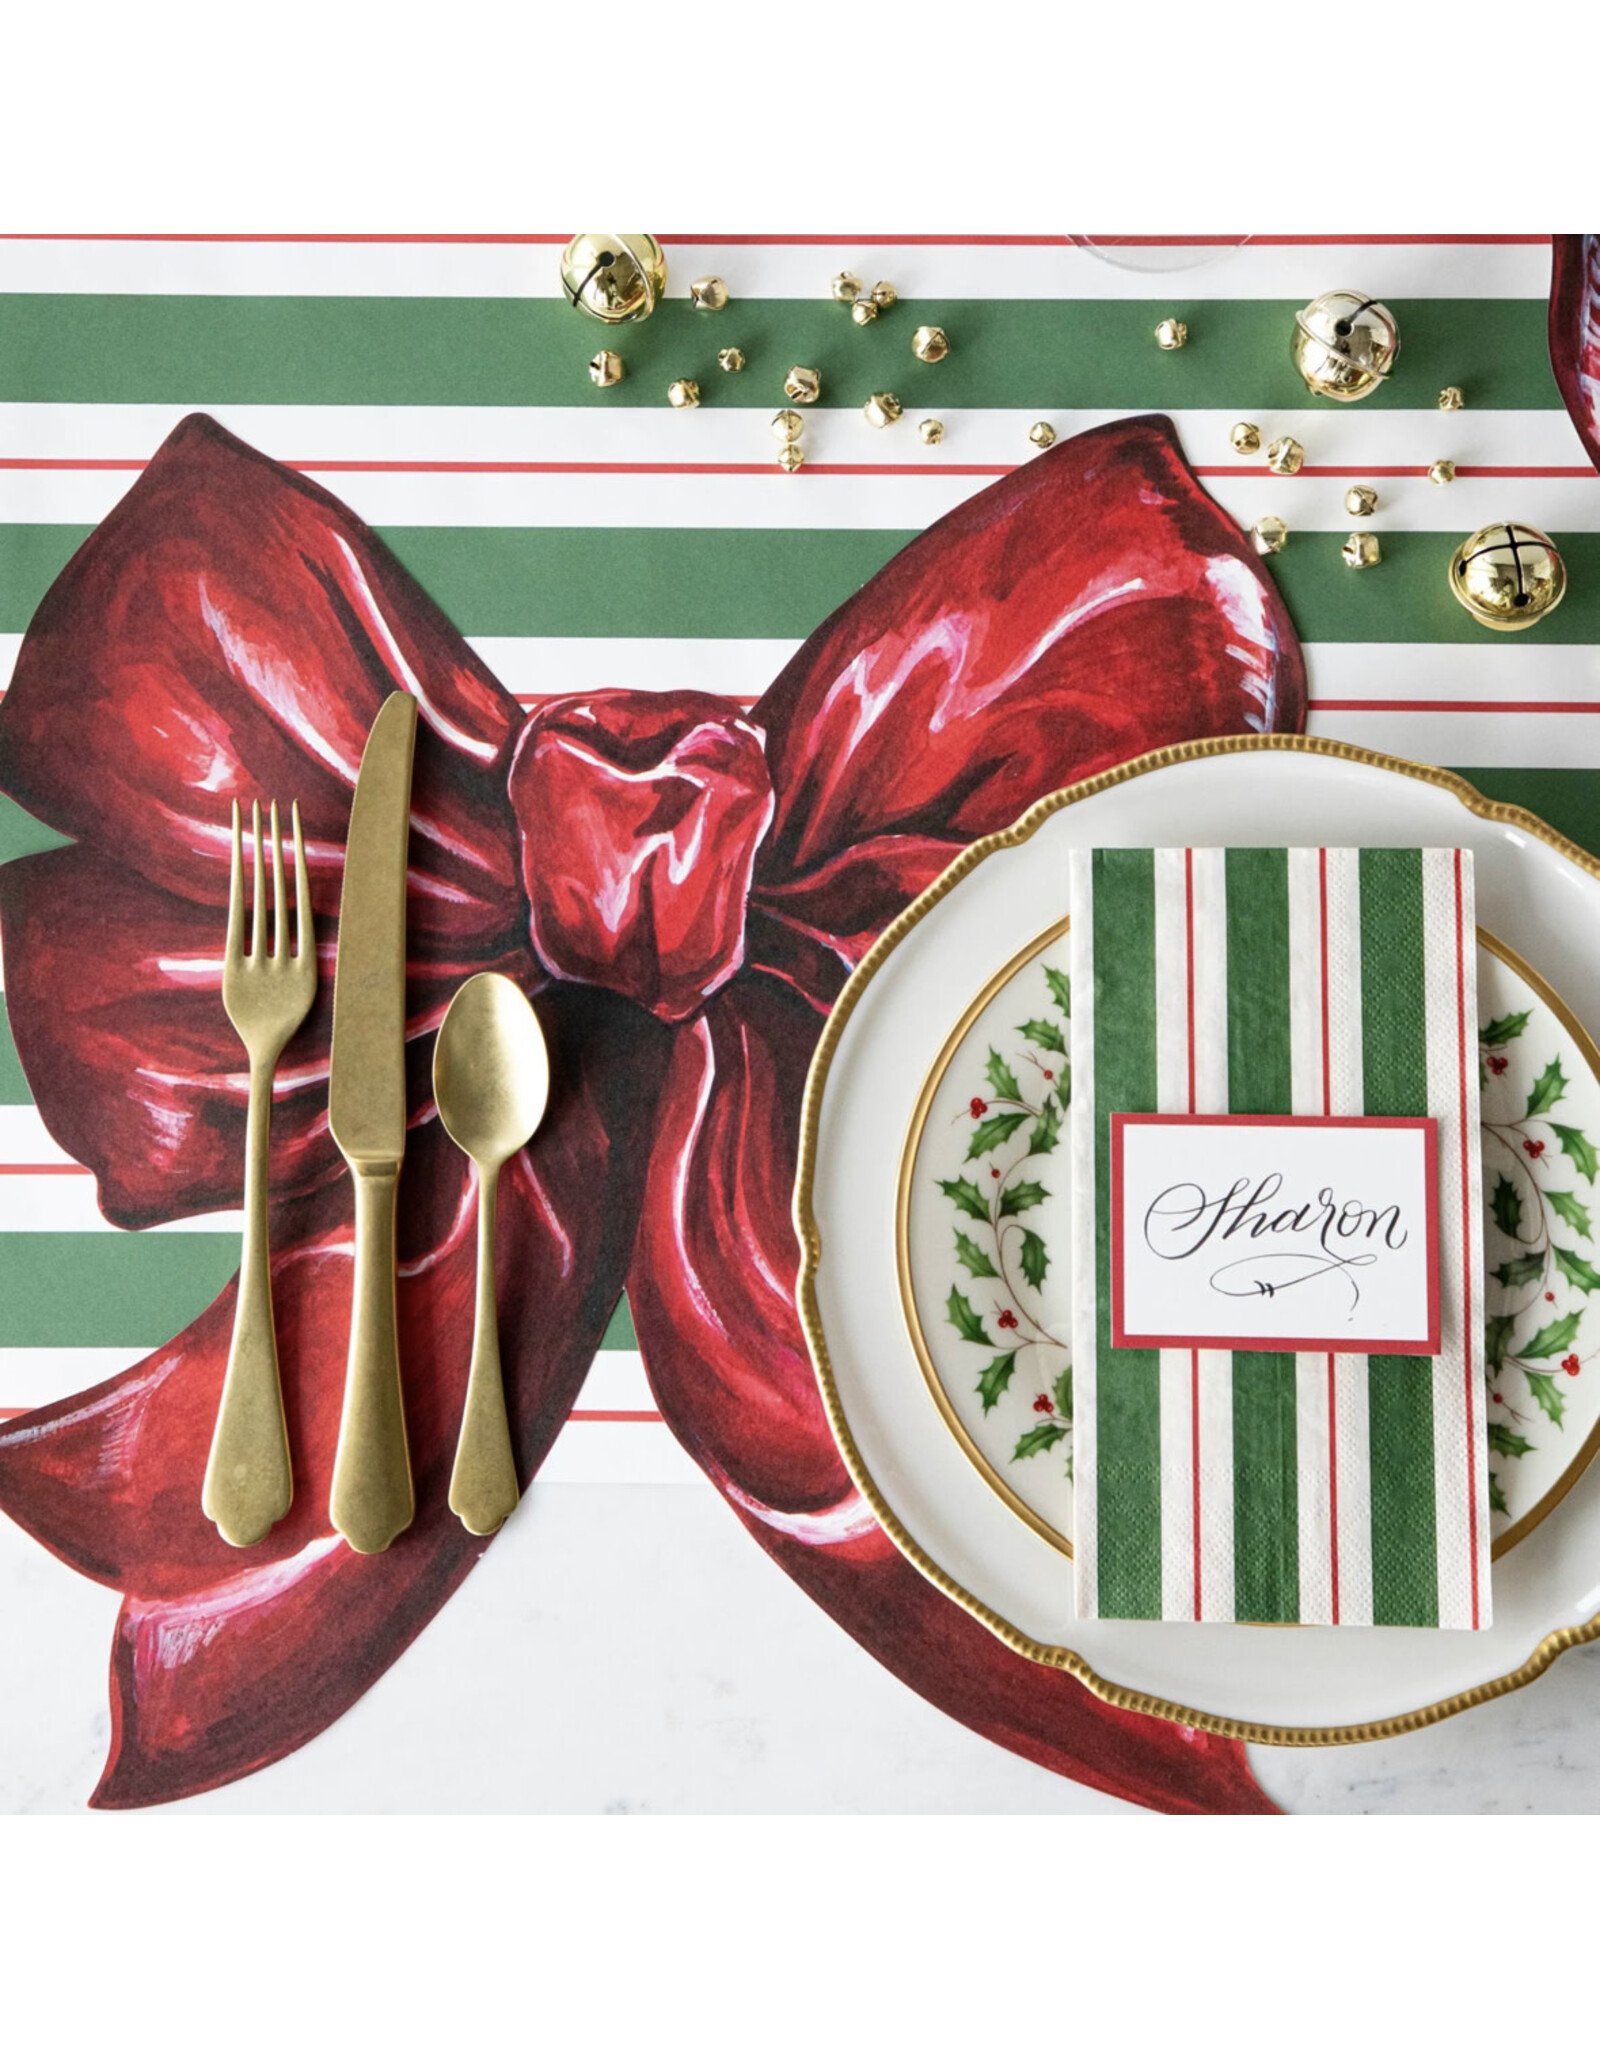 Hester & Cook Die-cut Bow Placemats